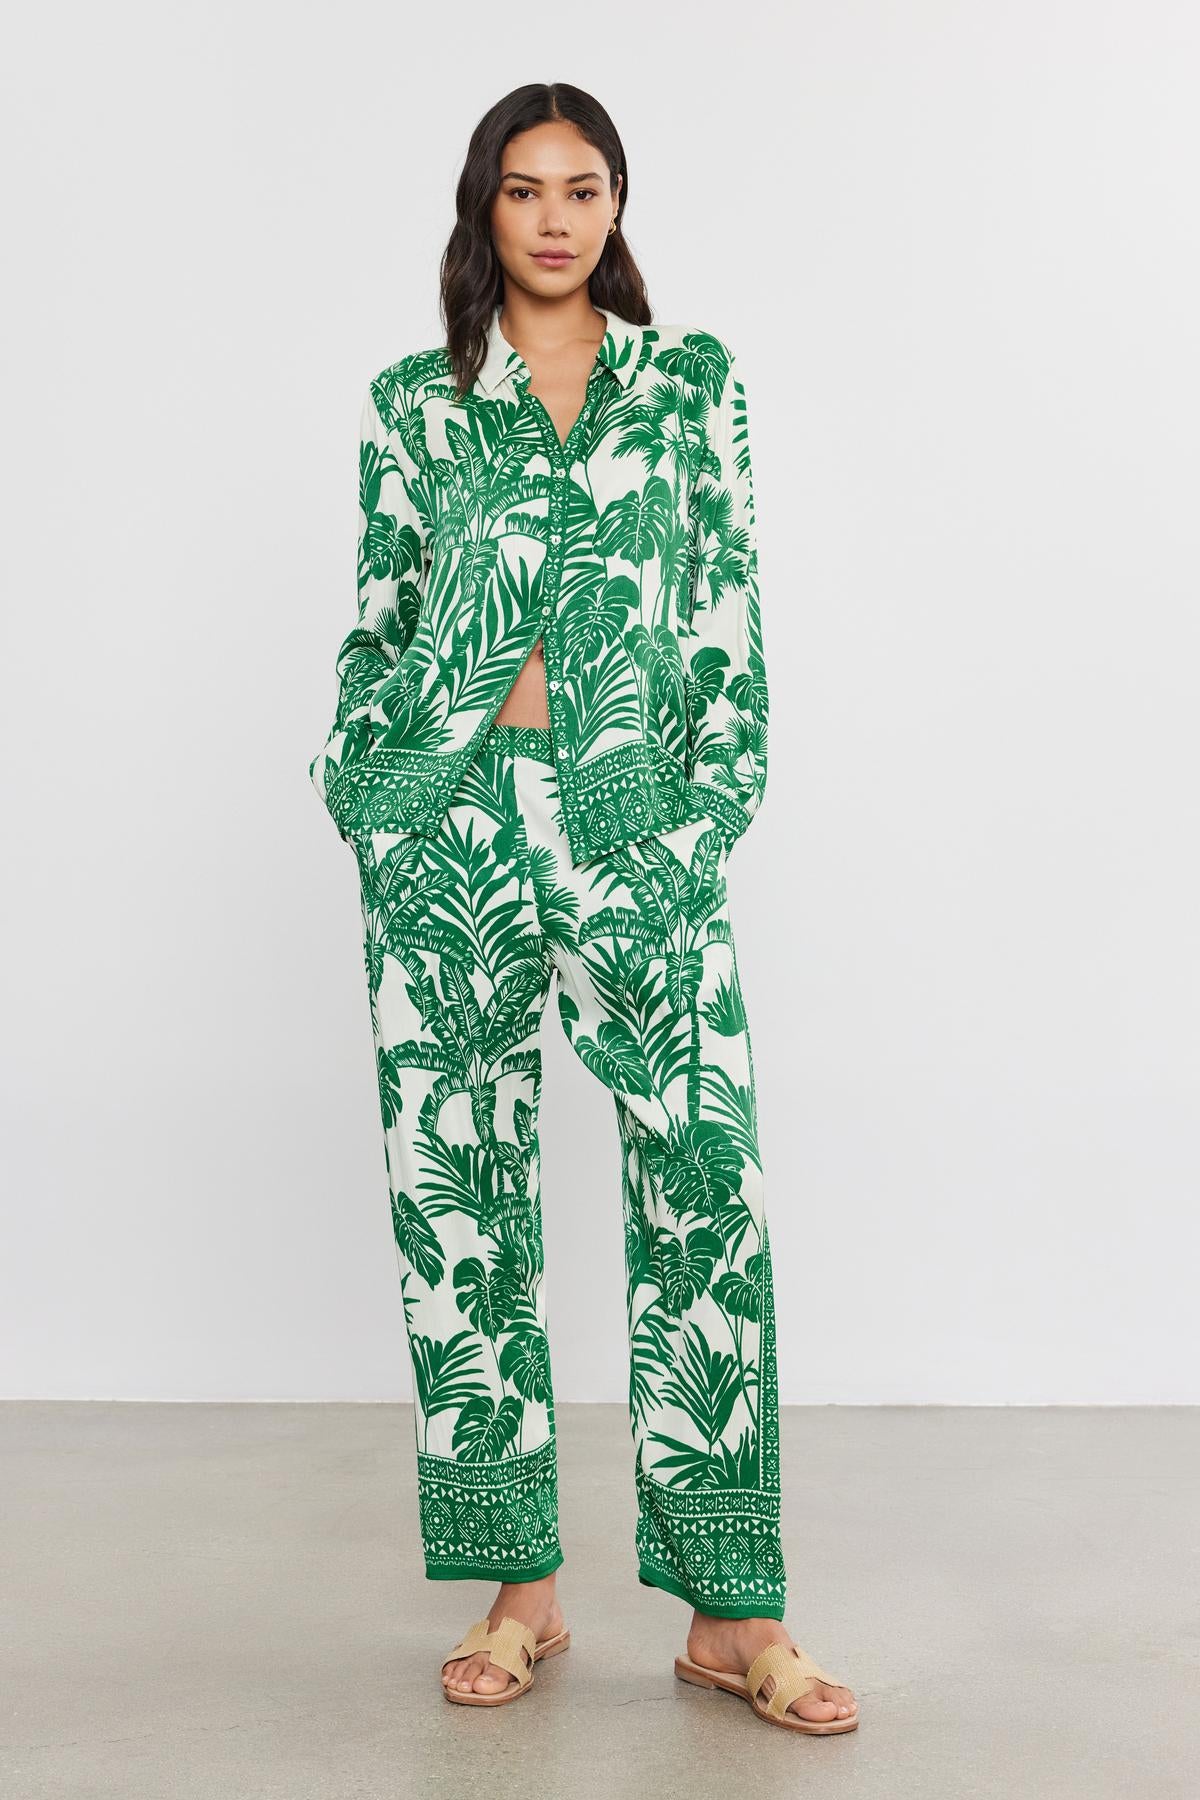 A woman wearing a green and white palm print pantsuit from Velvet by Graham & Spencer, with a matching crop top, standing against a plain backdrop, paired with beige sandals.-36910265008321